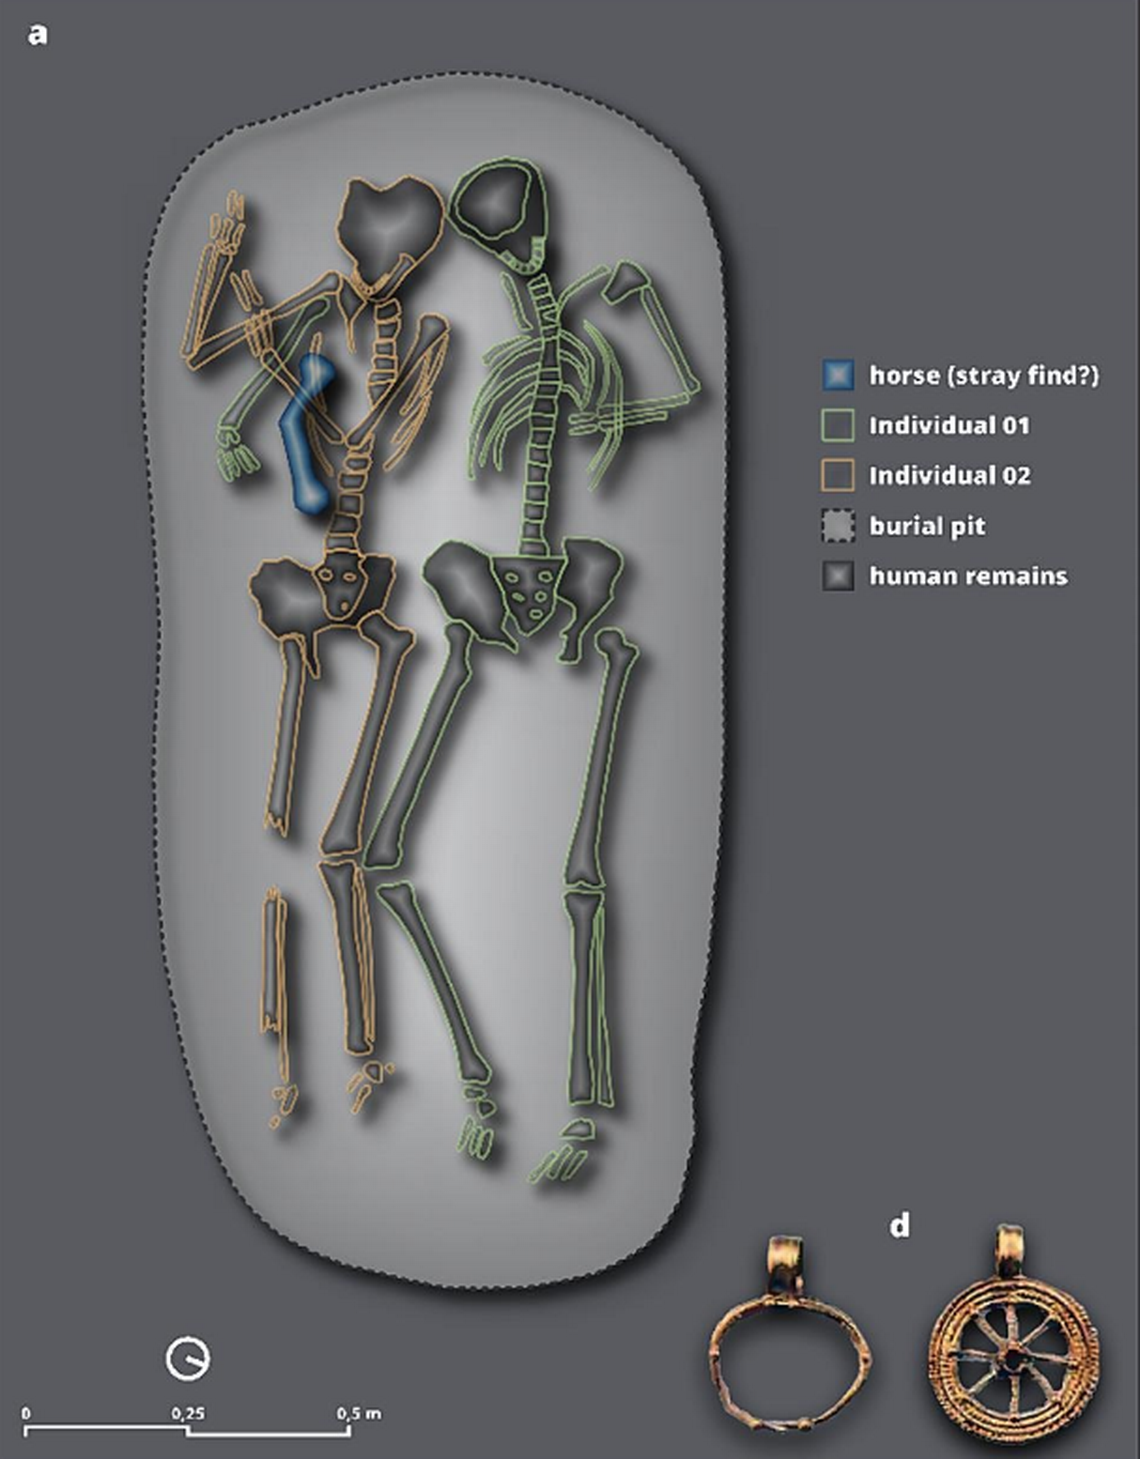 Pendant jewelry was found buried with the human remains suggesting a high social status, the researchers said.